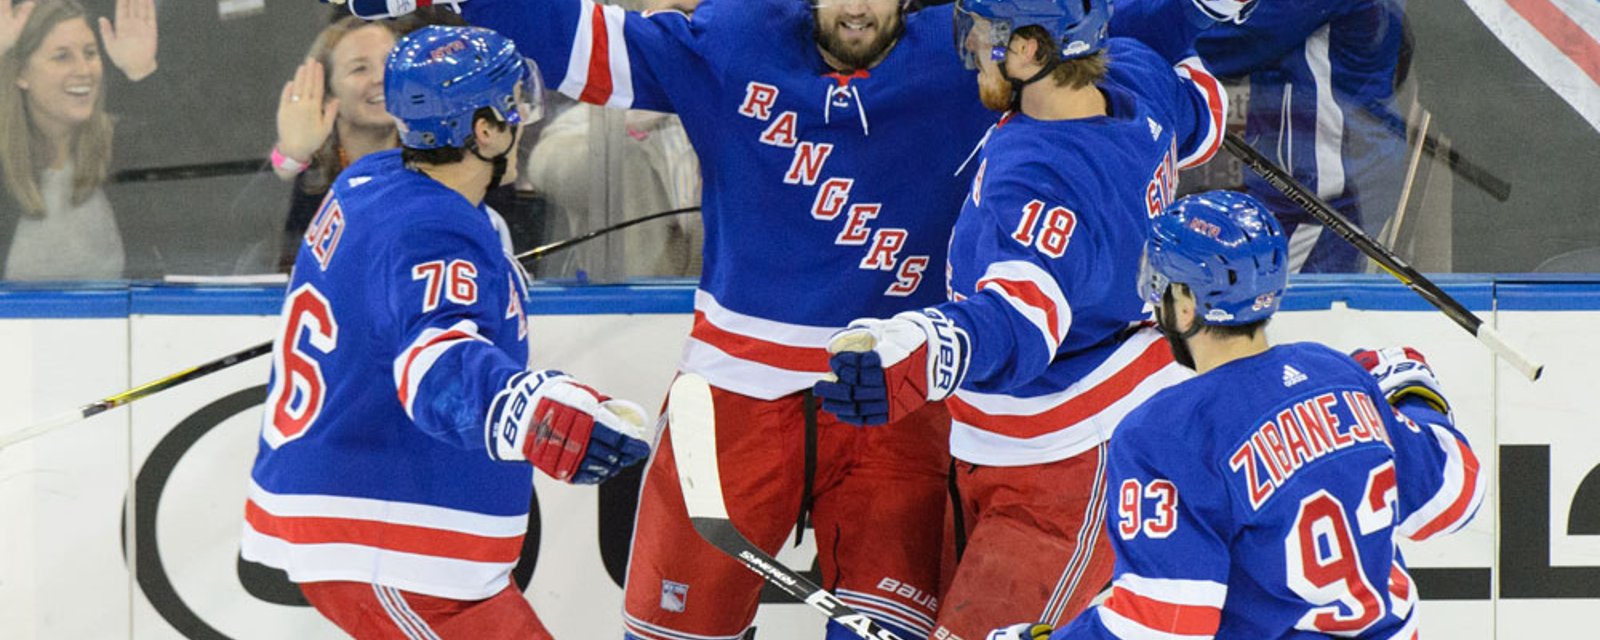 BREAKING: New team has emerged as frontrunner for Rick Nash sweepstakes!